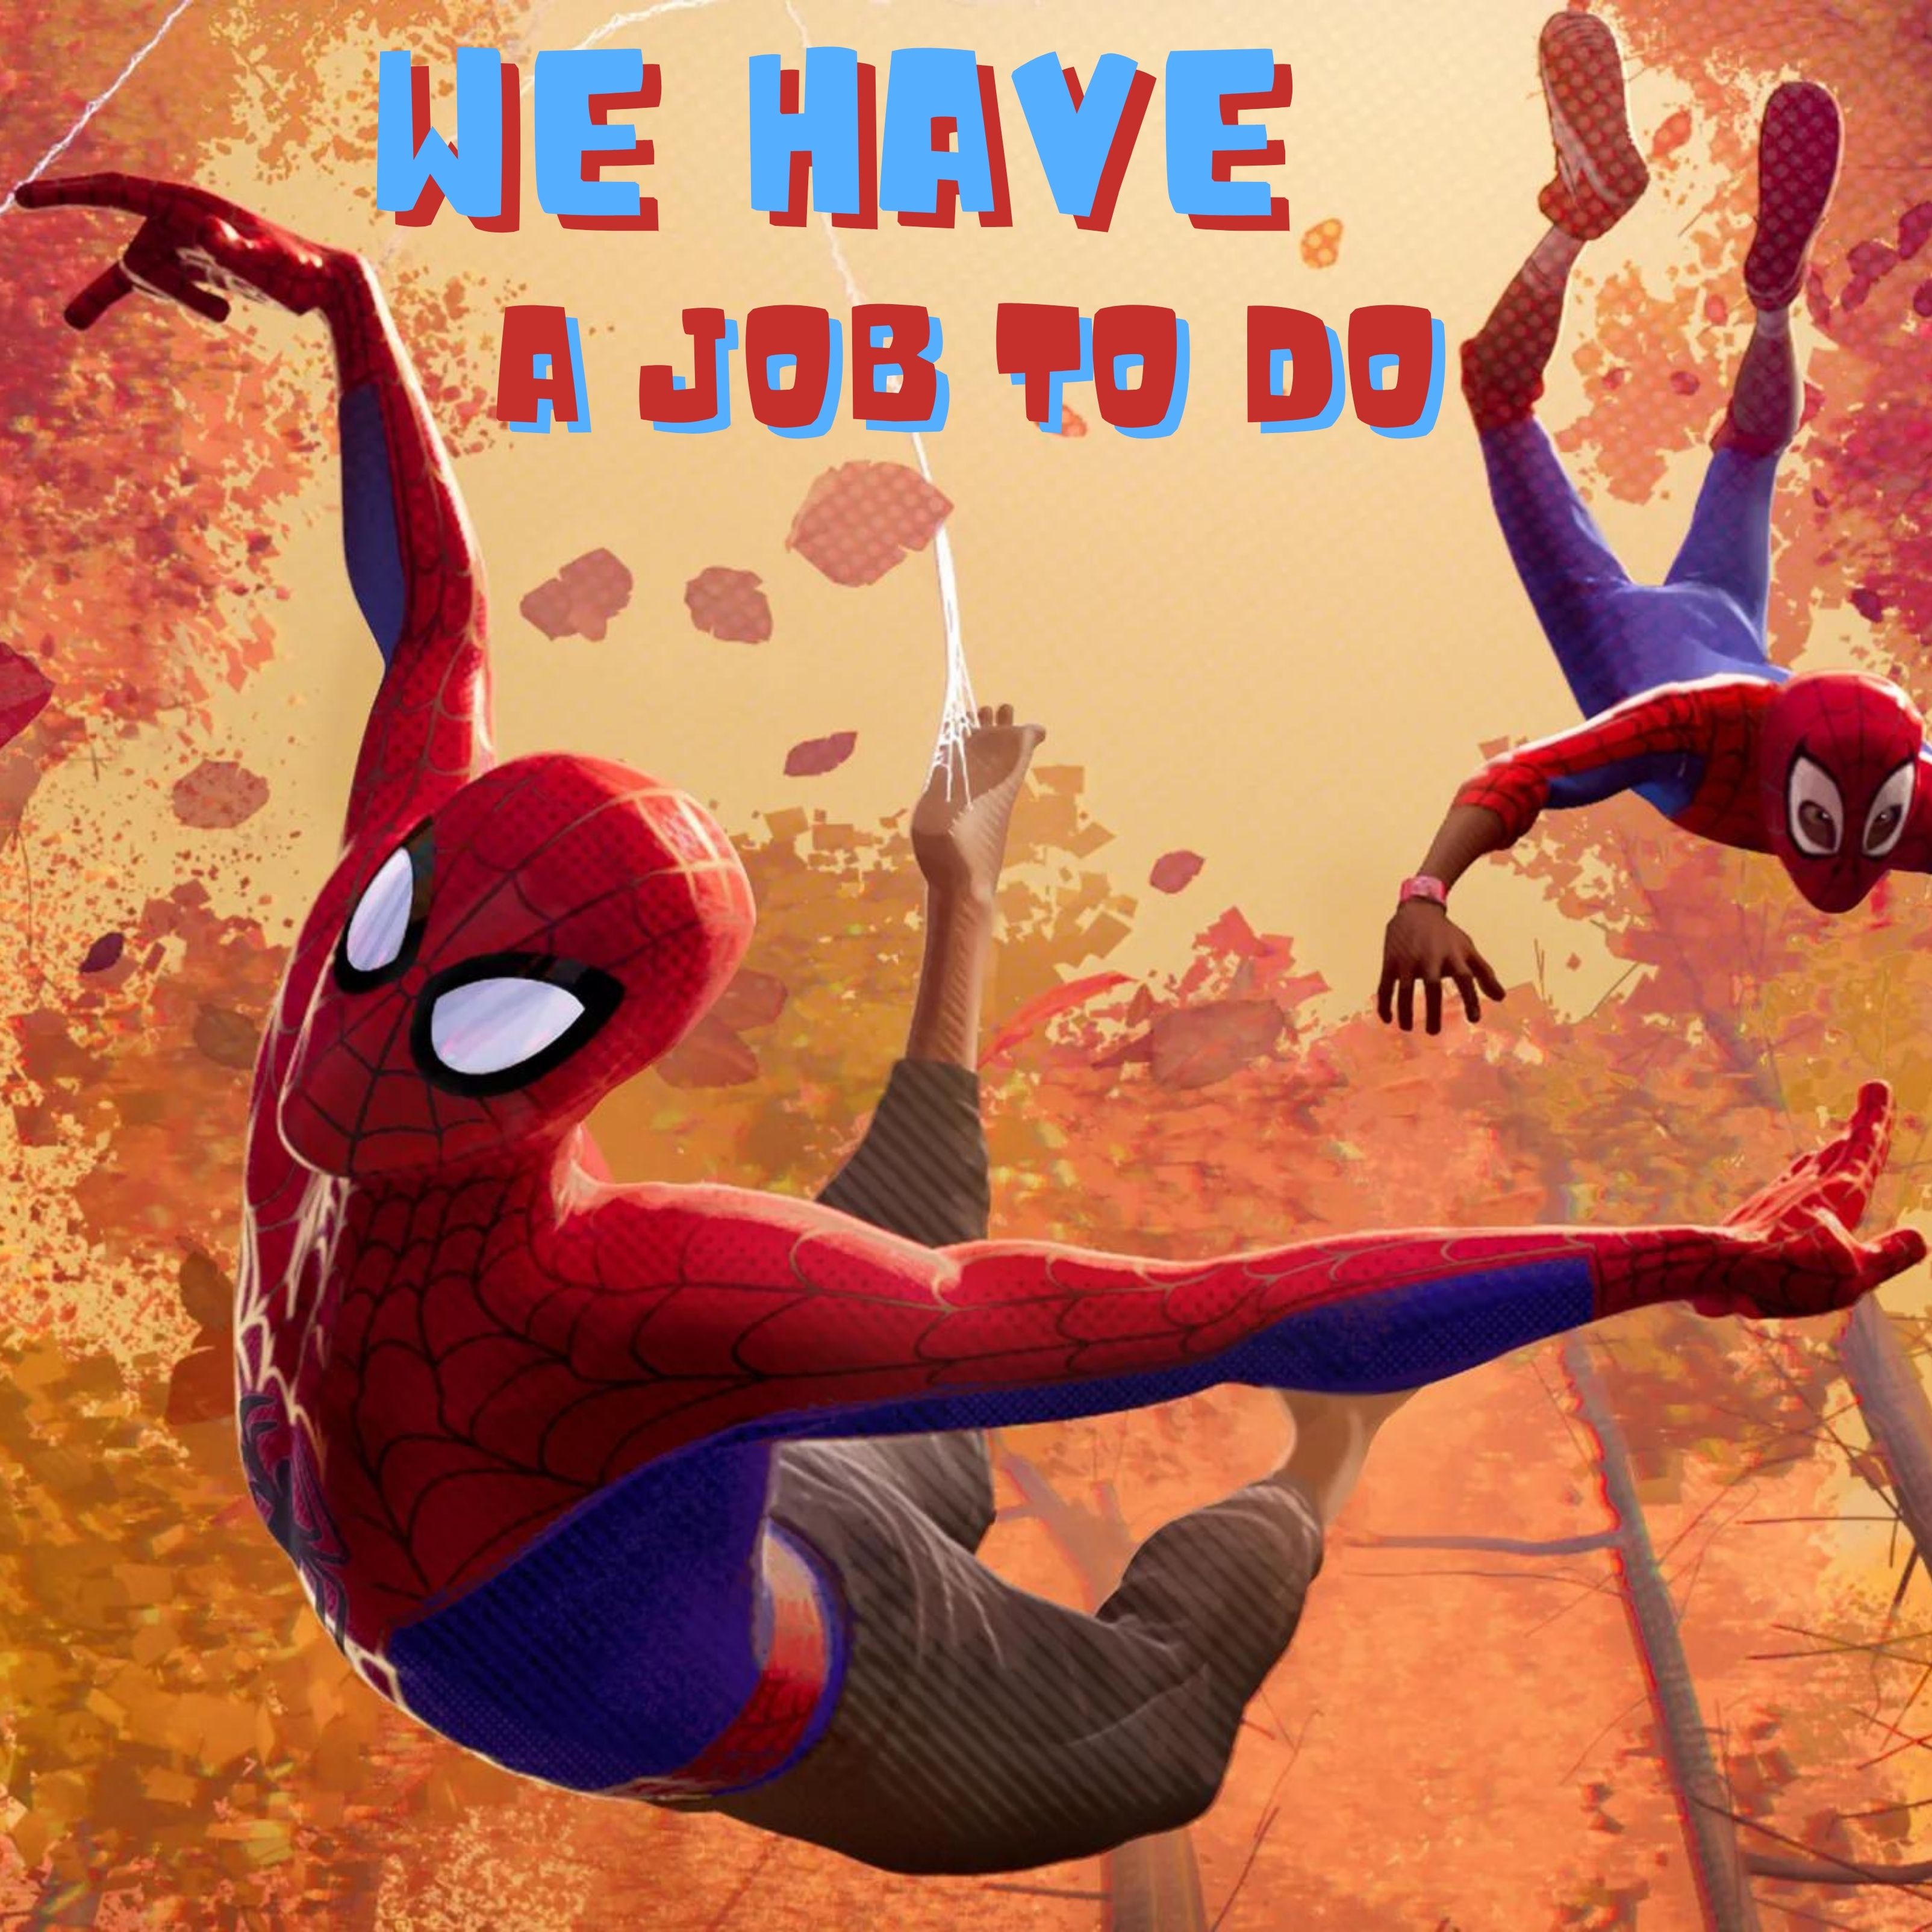 iPad Wallpapers We Have a Job to Do Duo Spiderman Ipad Wallpaper 3208x3208 px